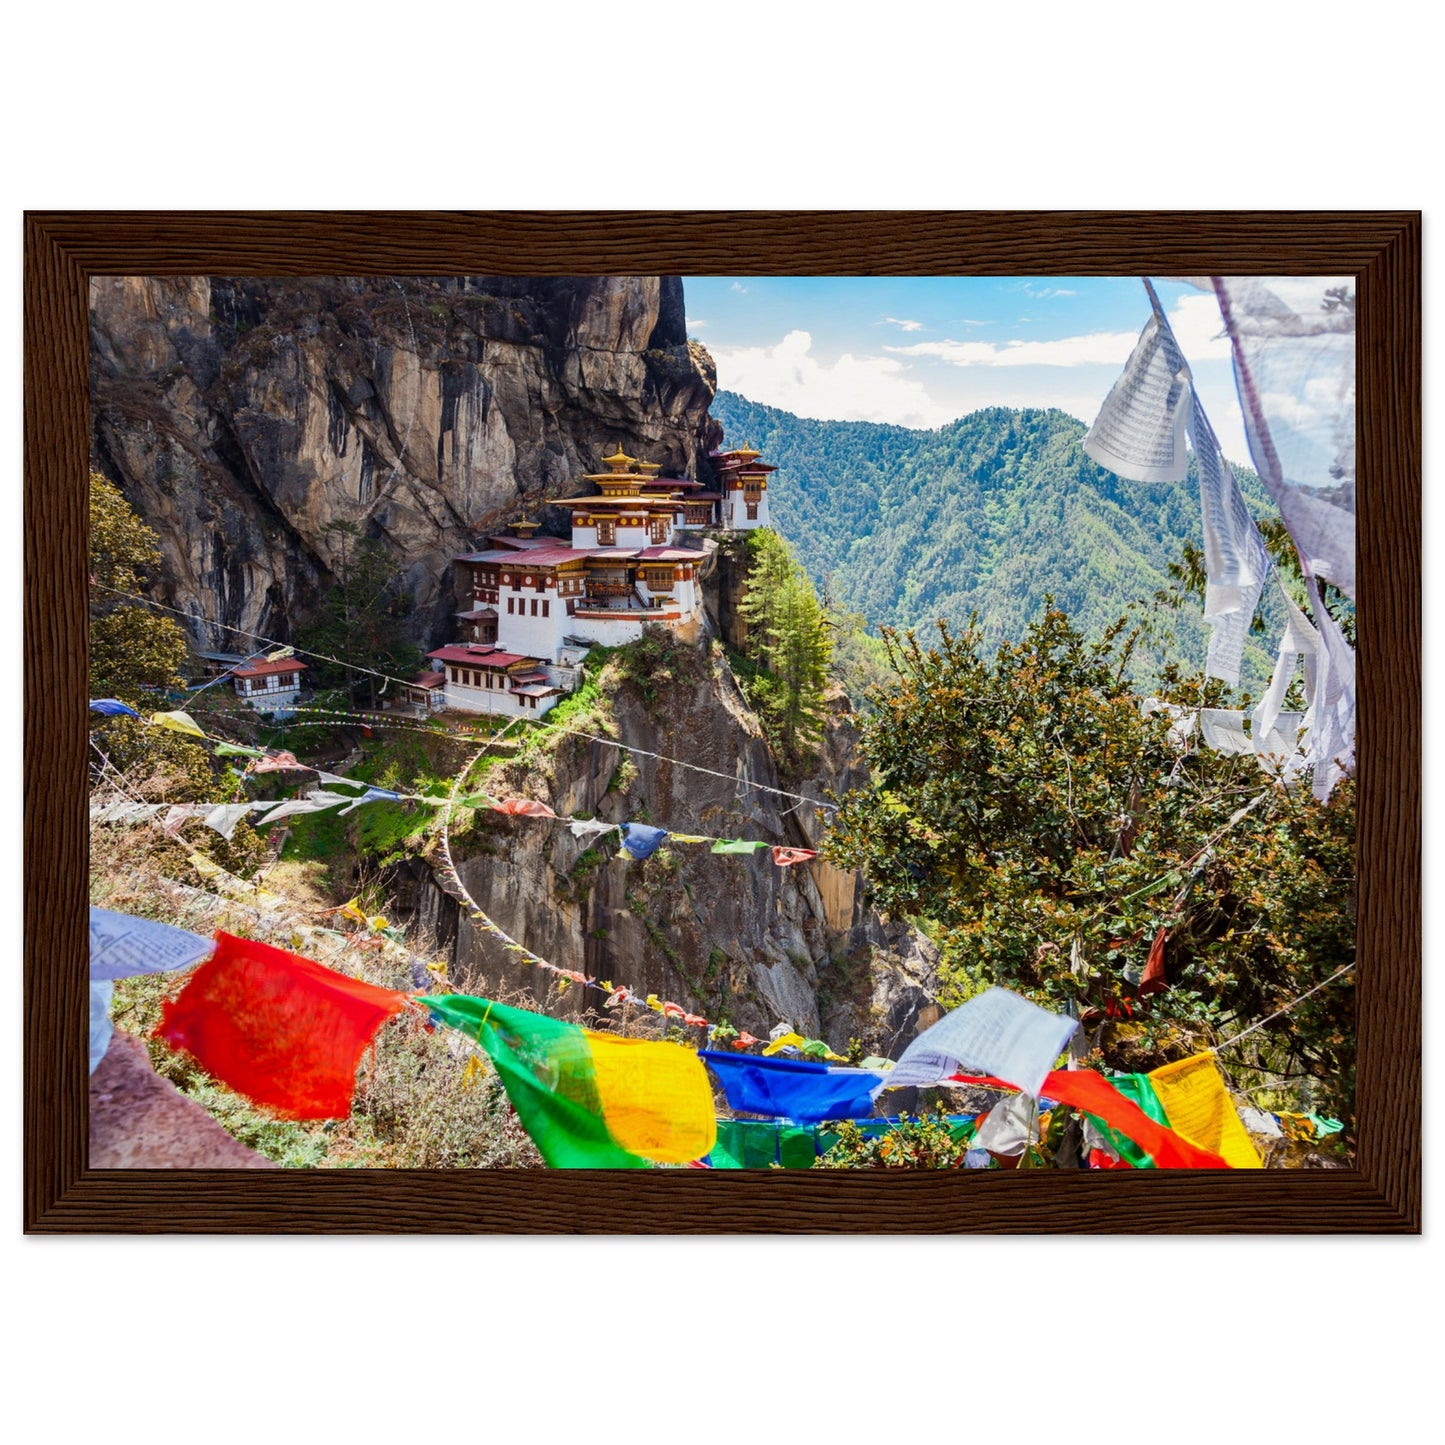 Tiger's nest Temple